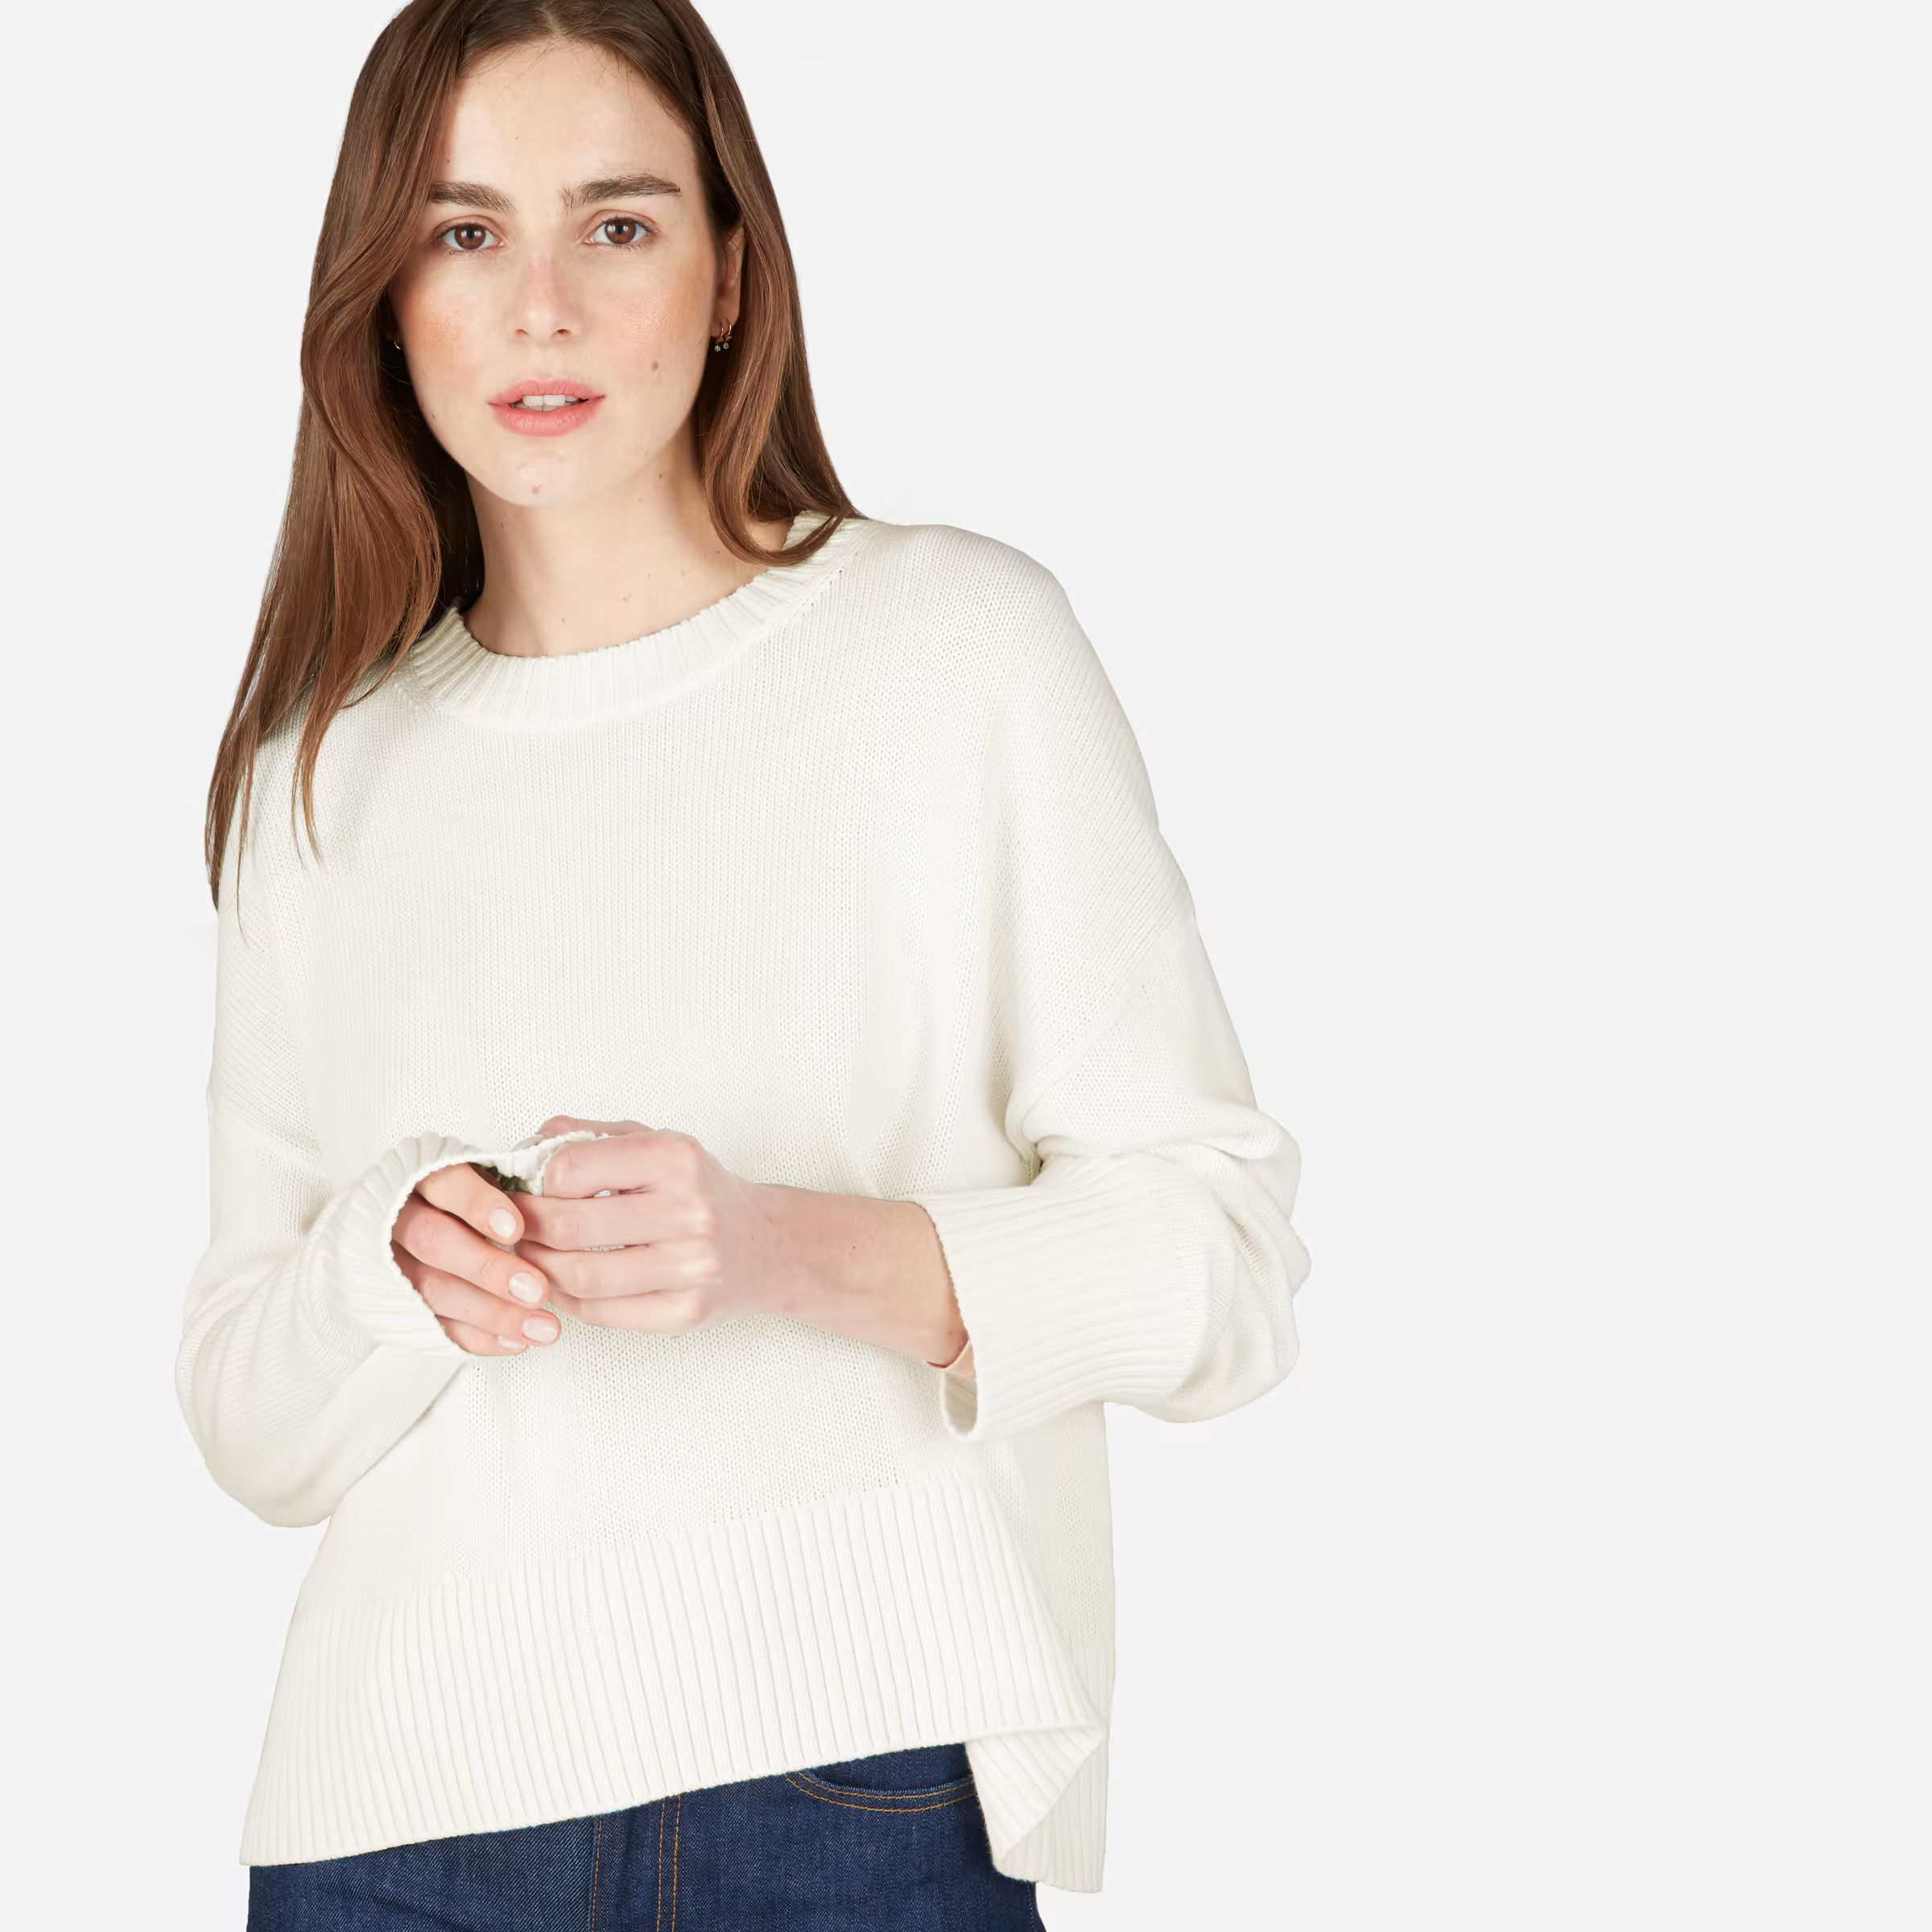 The Soft Cotton Square Crew$741596 Reviewsor 4 interest-free installments of $18.50 by  ⓘ | Everlane